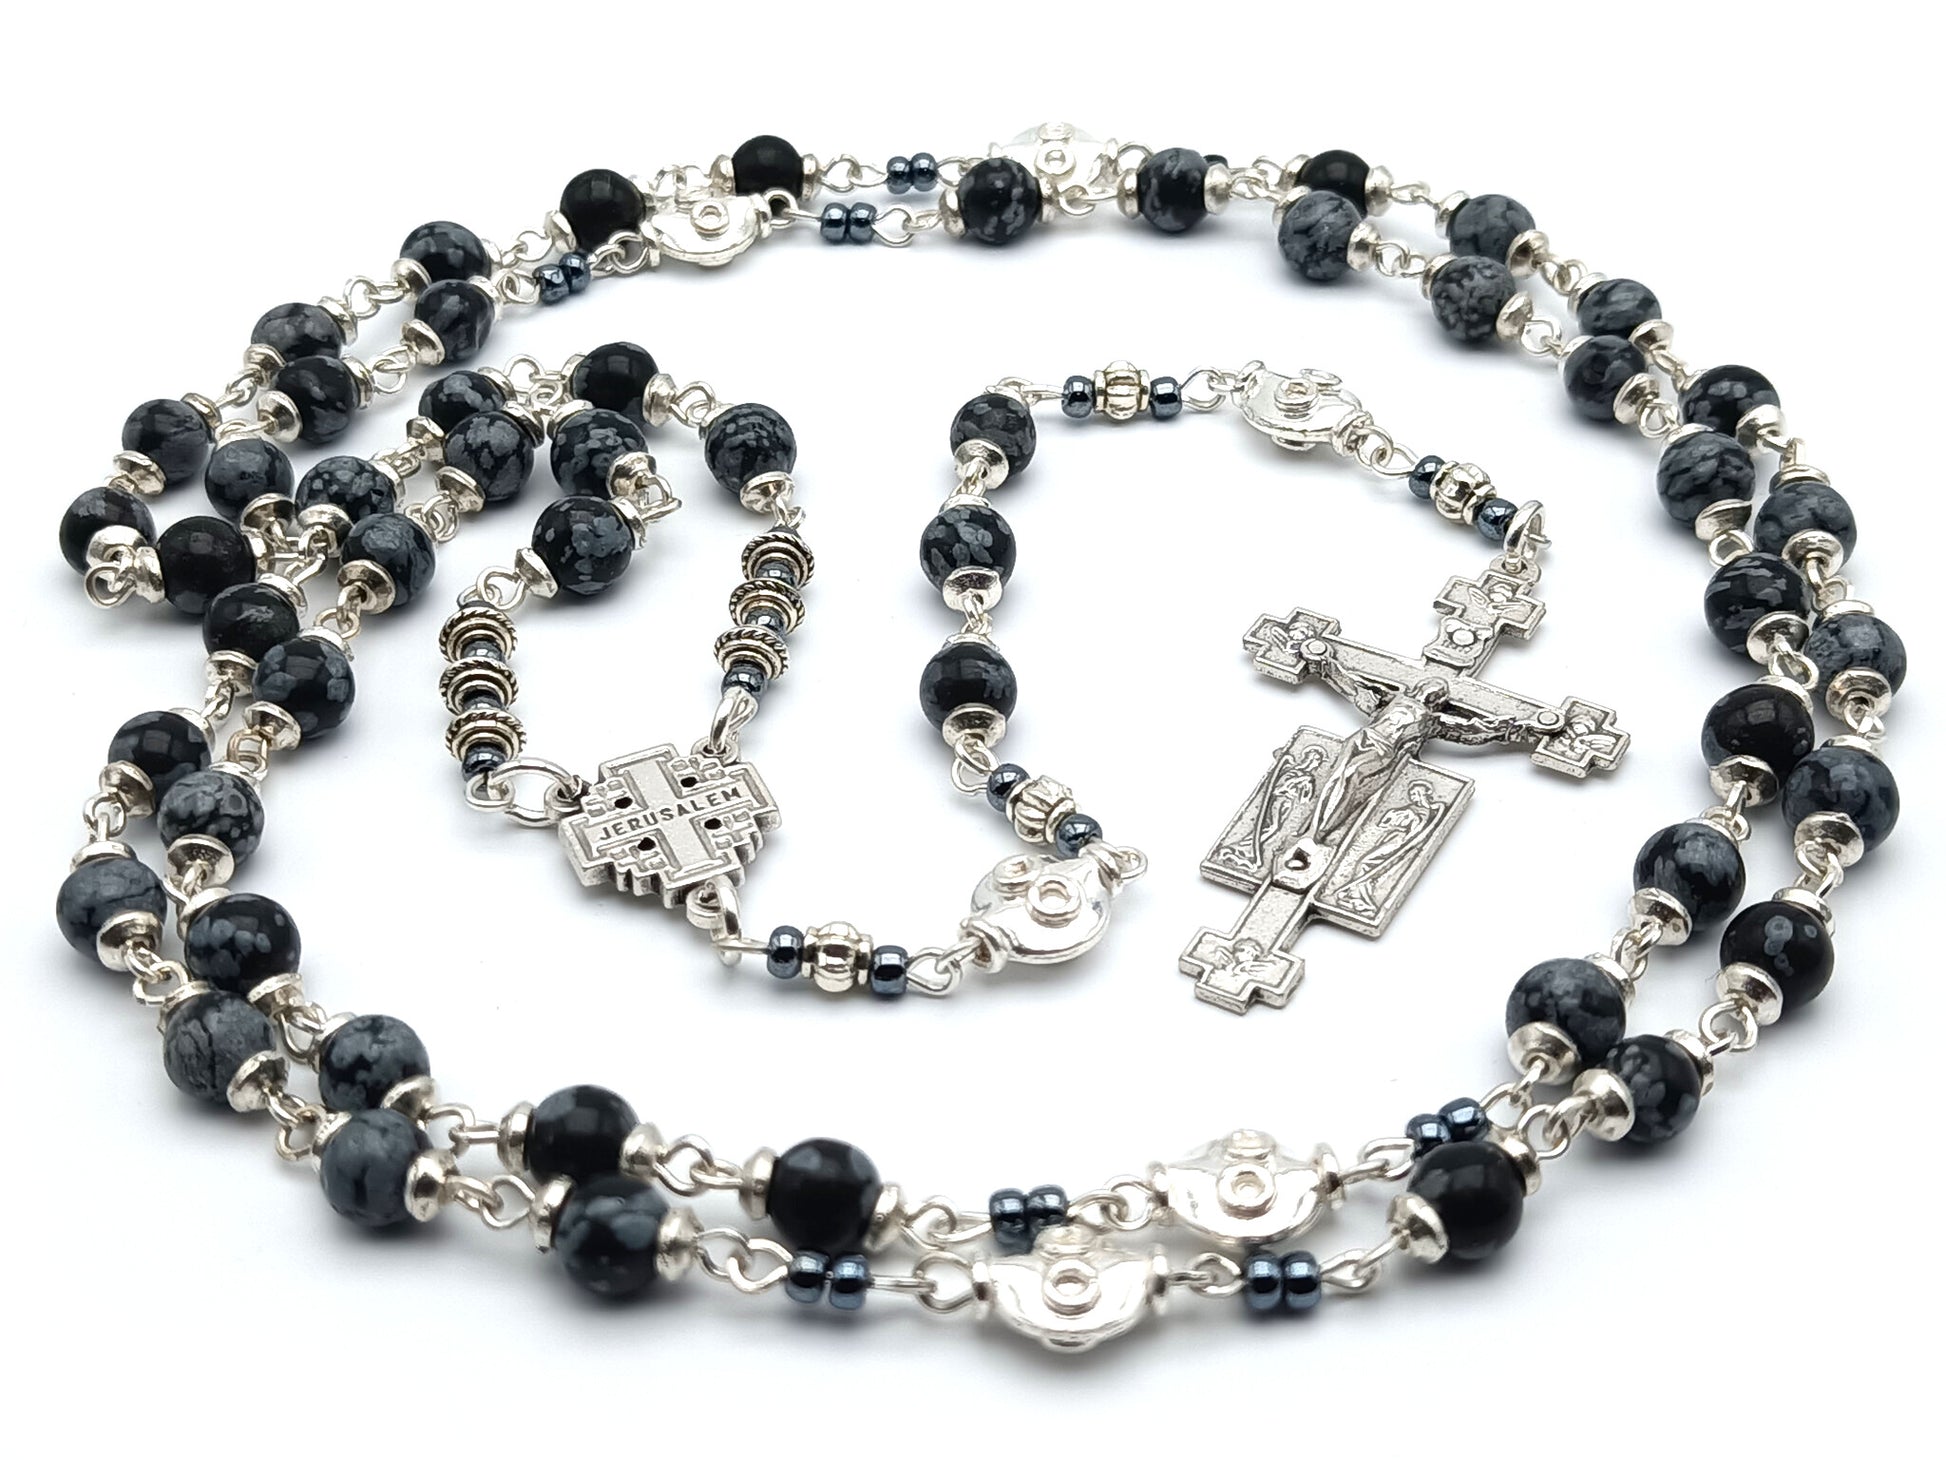 Jerusalem unique rosary beads with alabaster gemstone beads, silver Holy angels crucifix, pater beads and centre medal.